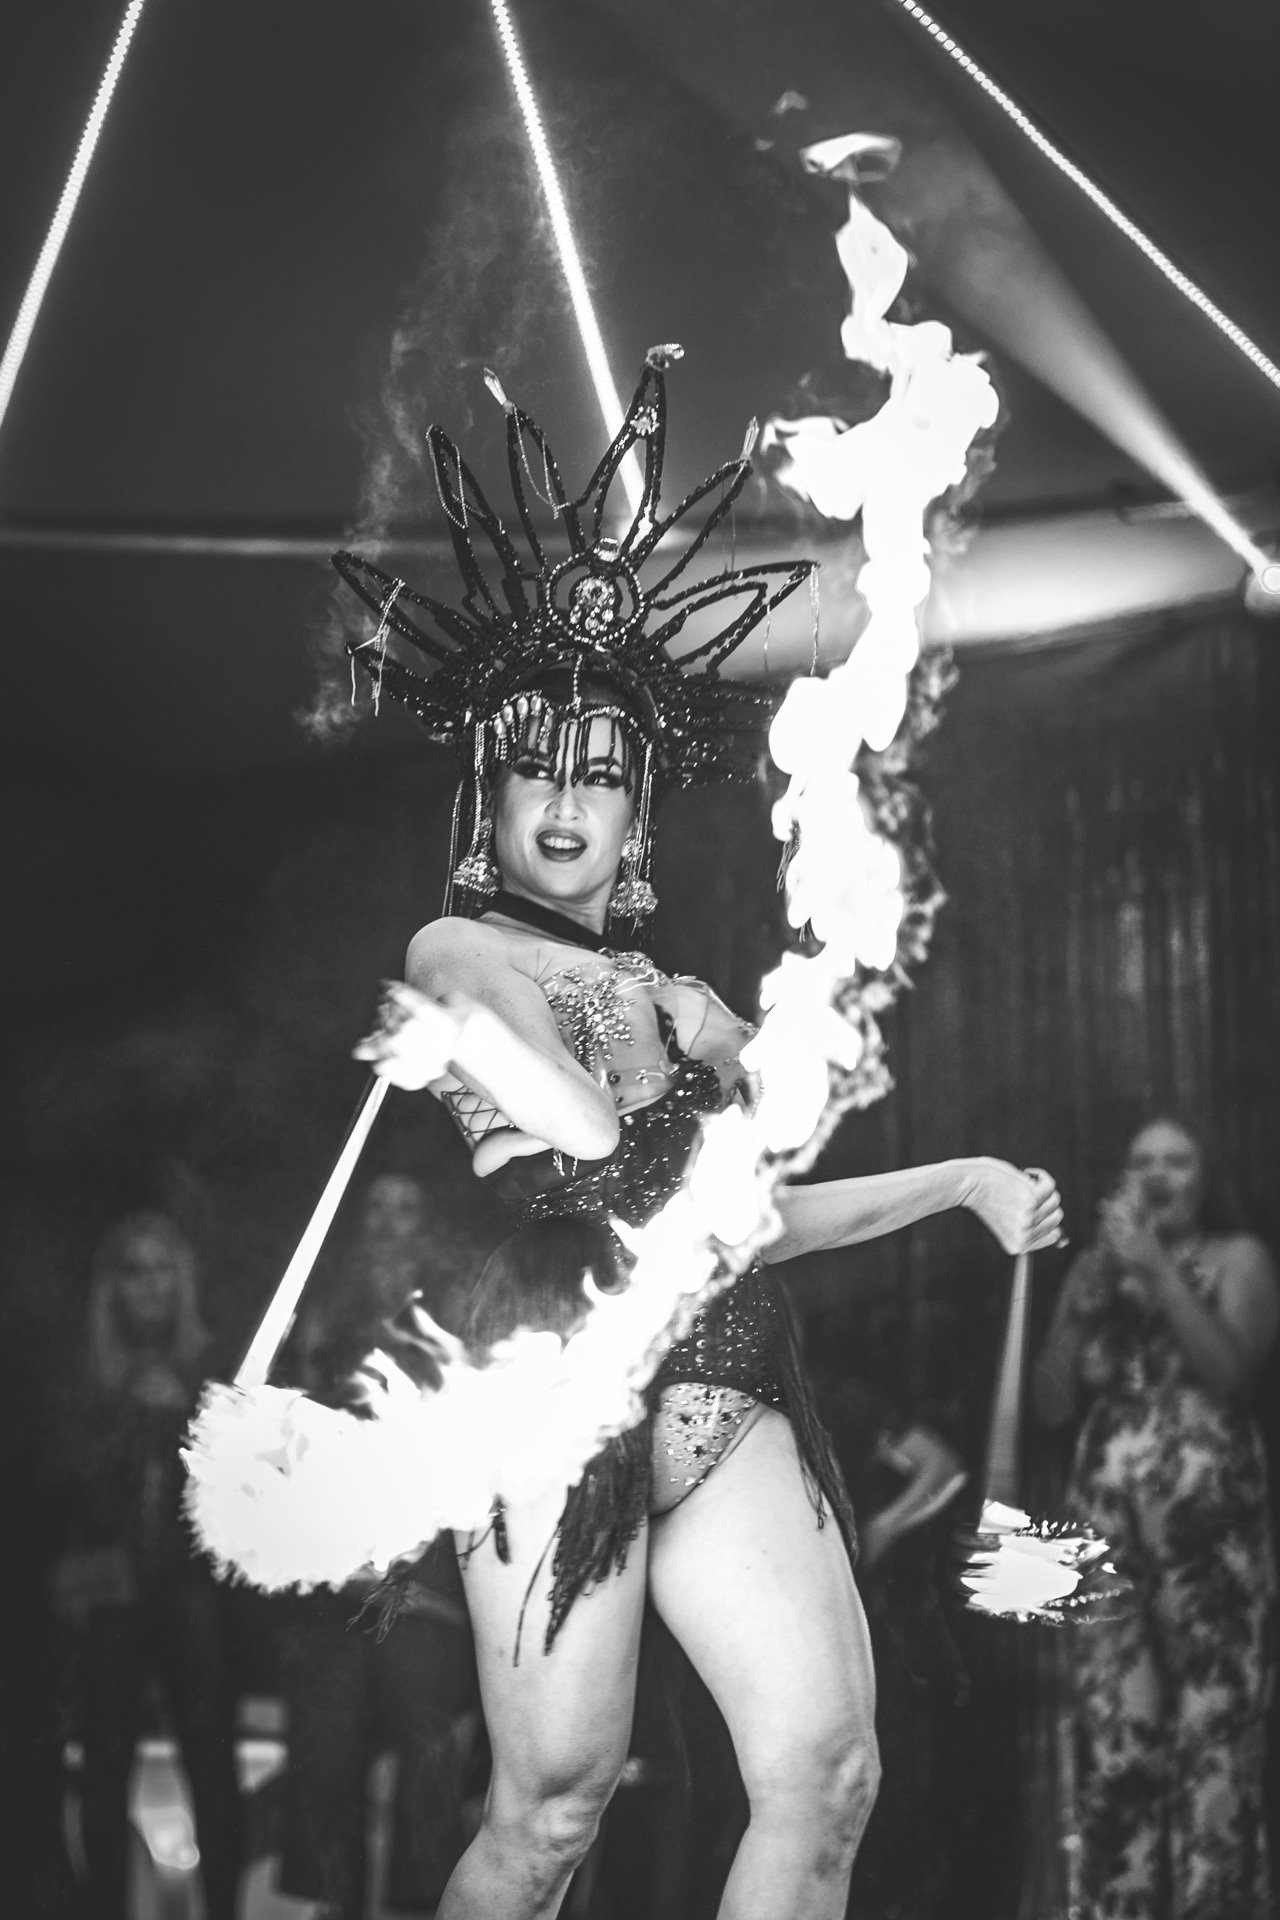 Burlesque fire performance by Missy fatale of The Parrot Cage returns to Elmore for staff Christmas party